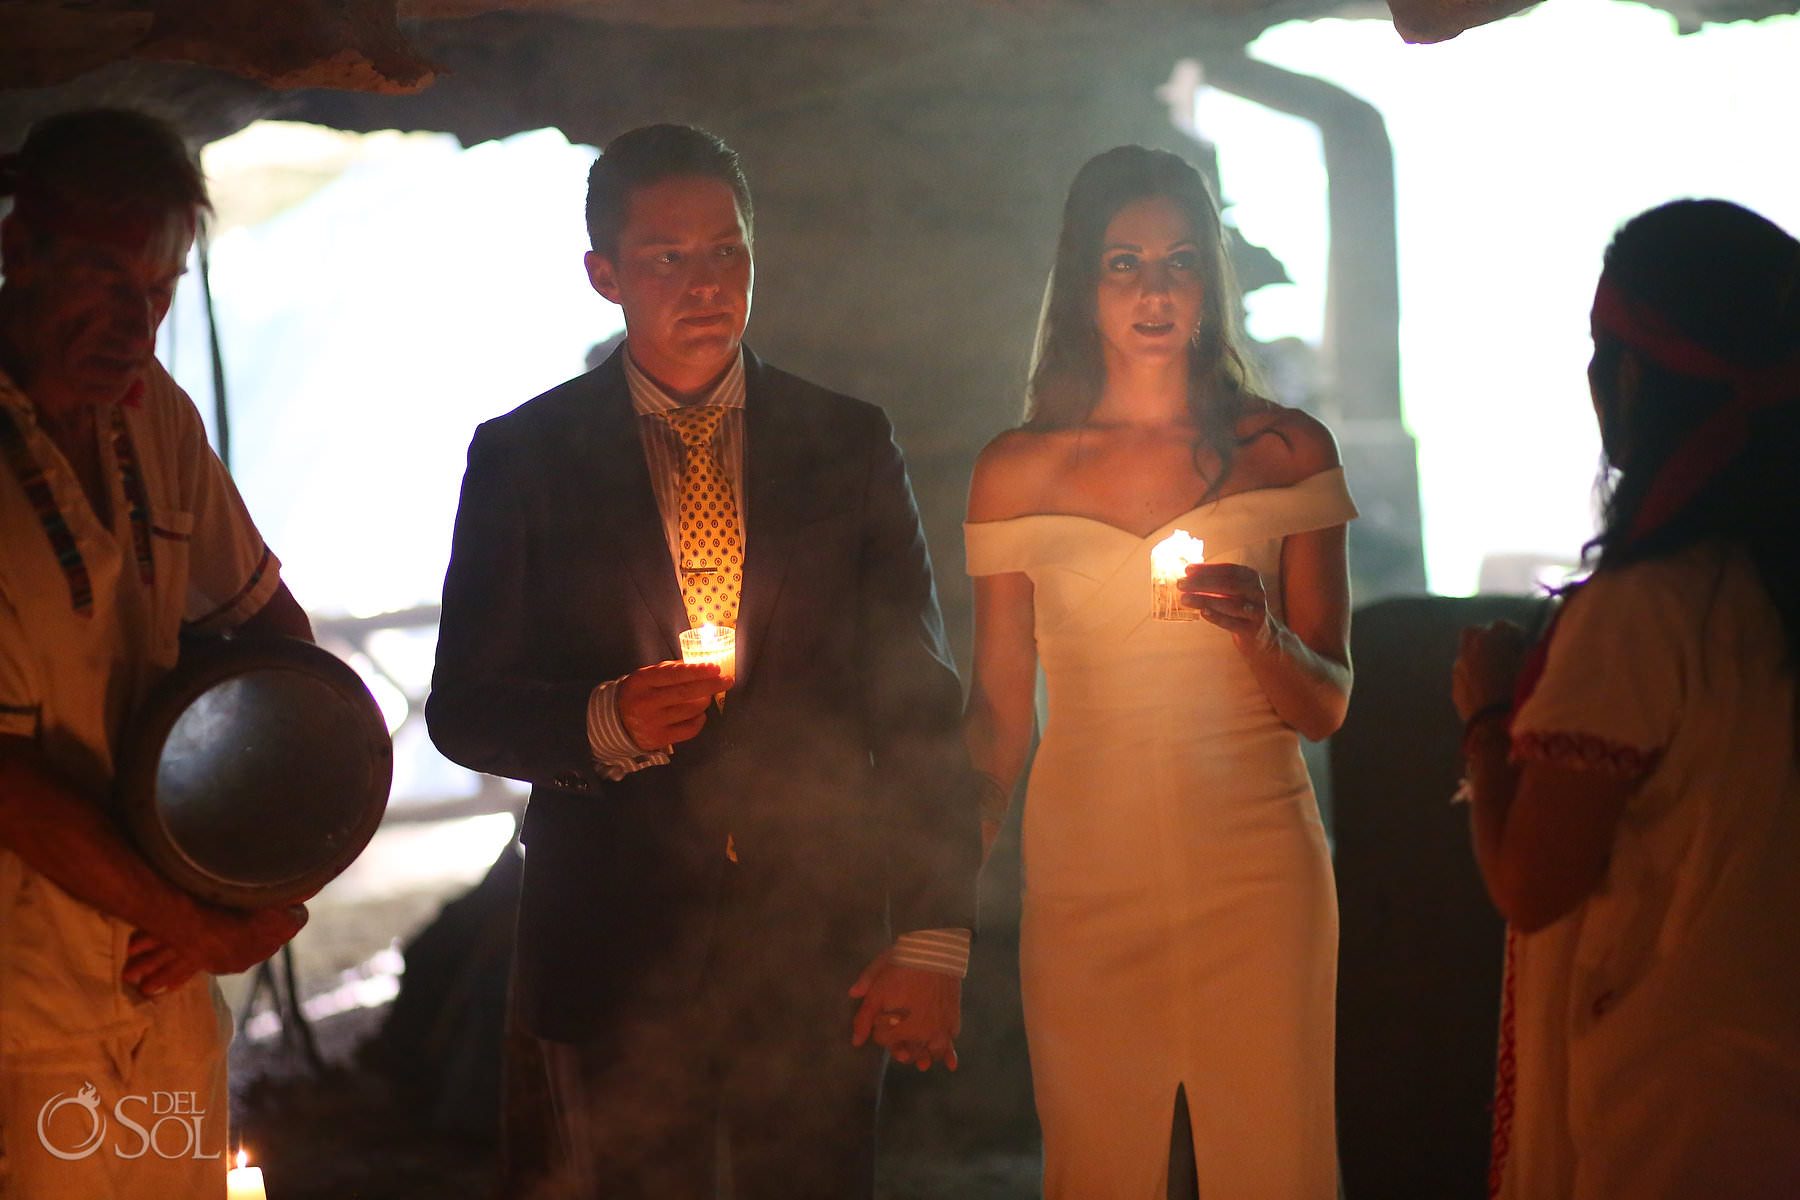 Elopement ceremony underground in Mexican cenotes